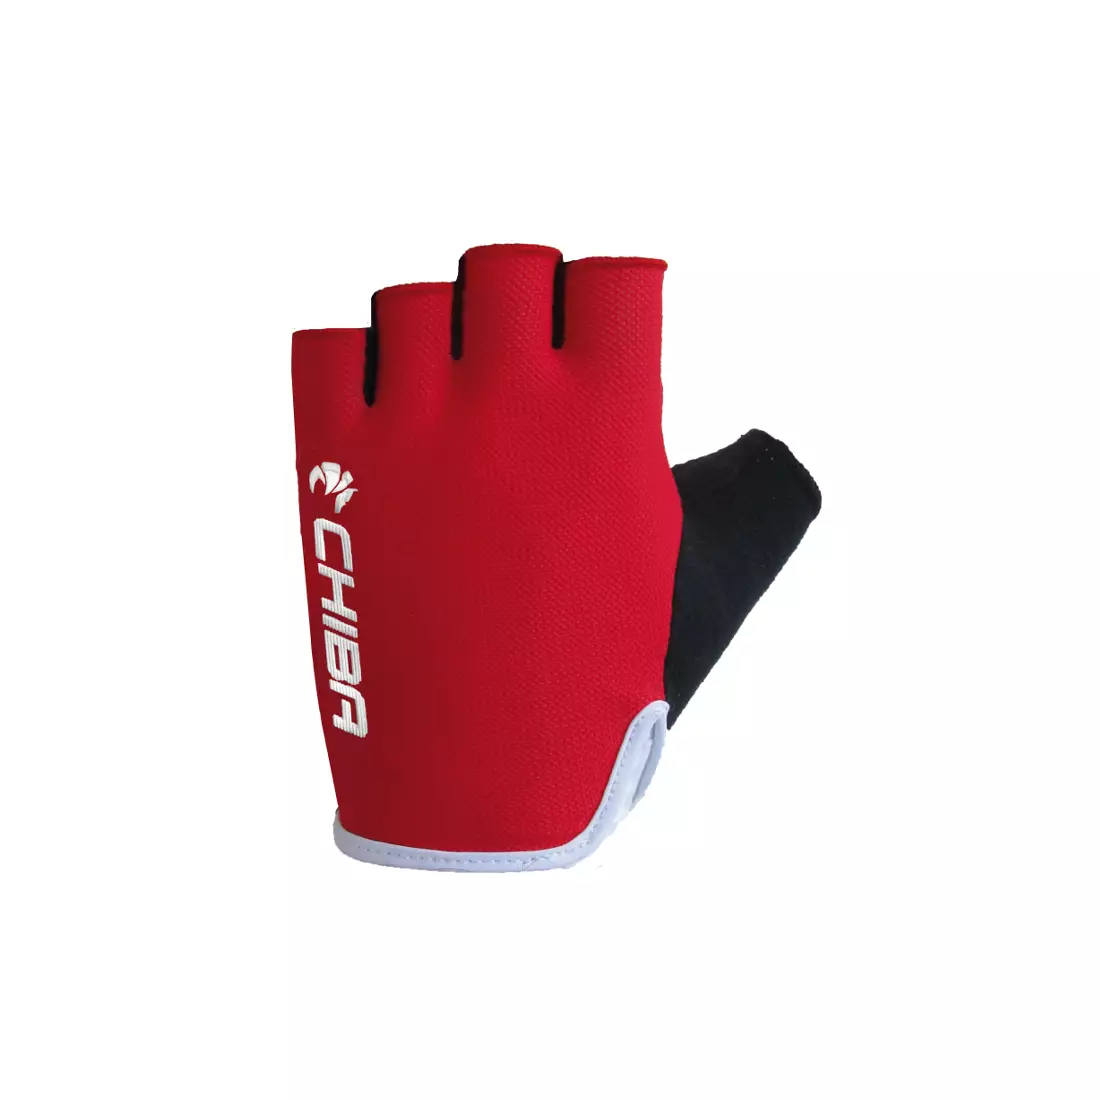 CHIBA BREEZE cycling gloves, red